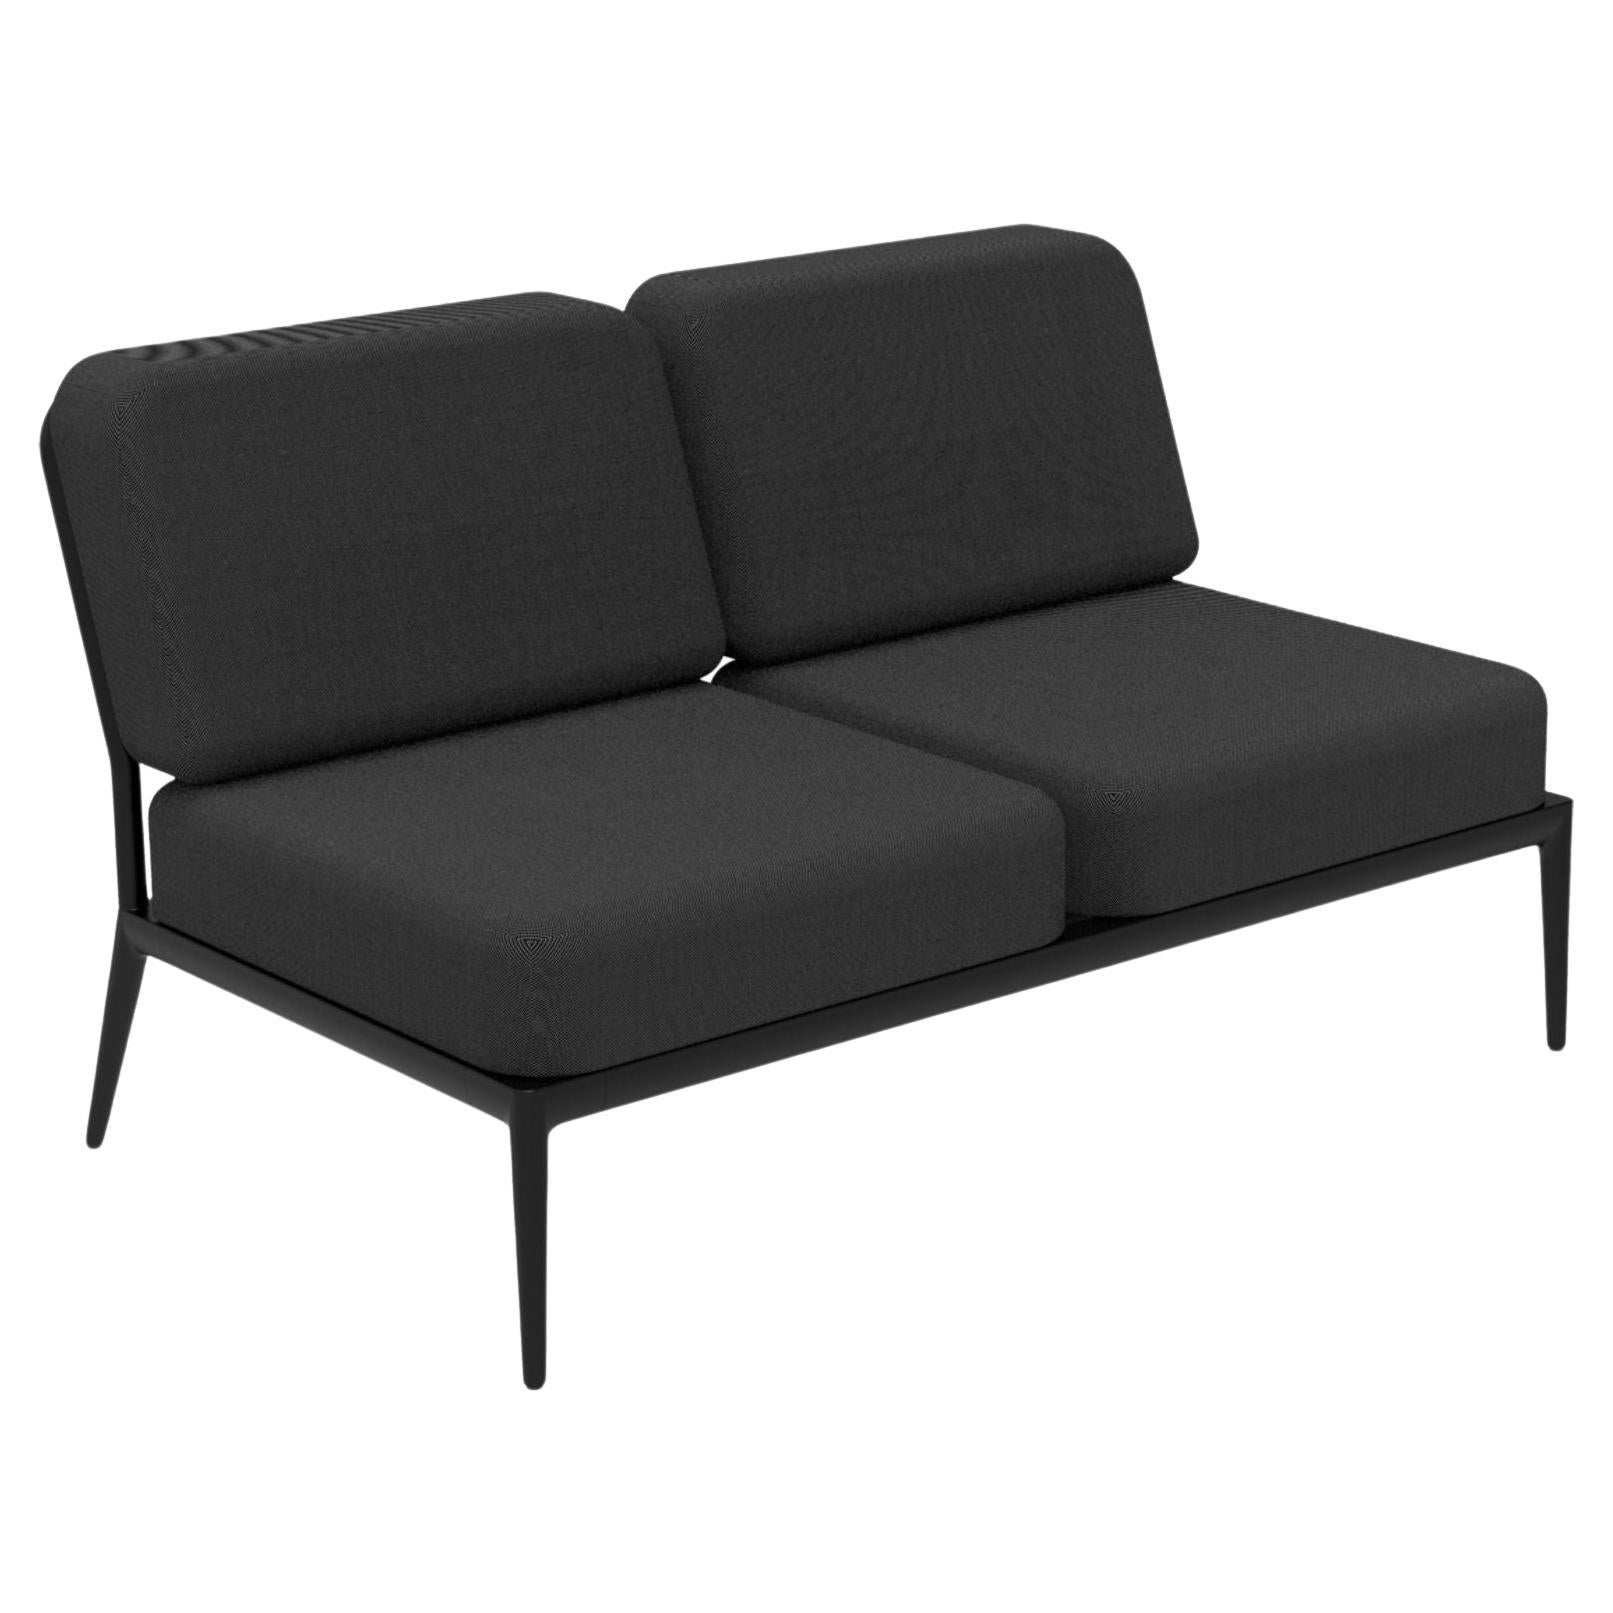 Nature Black Double Central Modular Sofa by Mowee For Sale